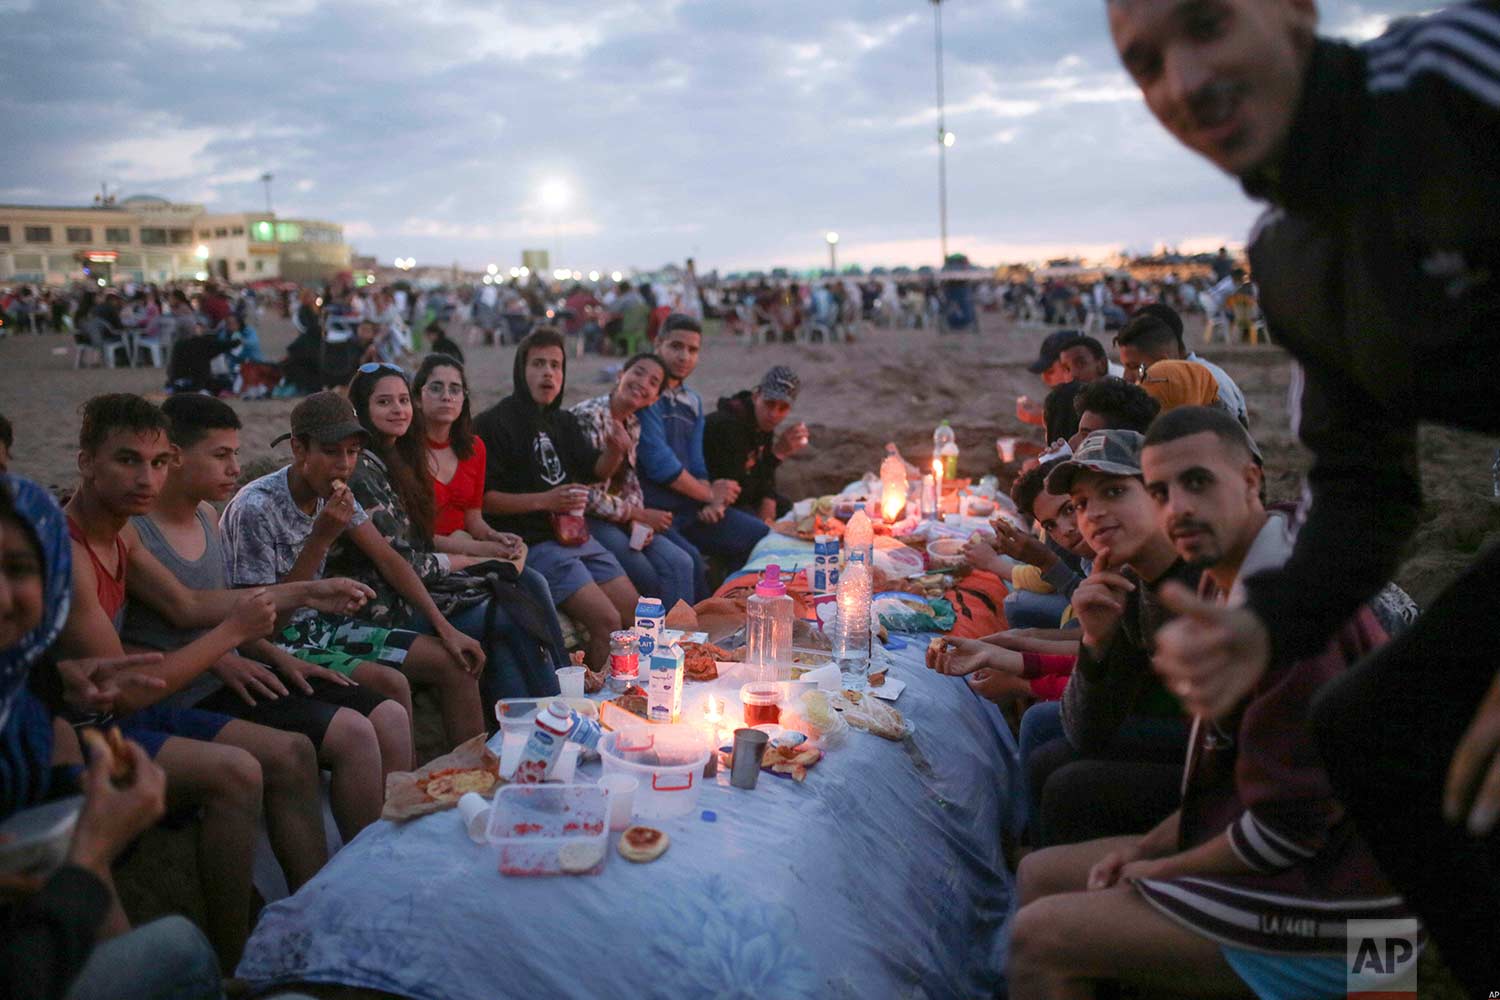  Friends pose for a photo as they prepare to break their fast on the beach, in the holy month of Ramadan, Rabat, Morocco, Saturday, June 9, 2018. (AP Photo/Mosa'ab Elshamy) 